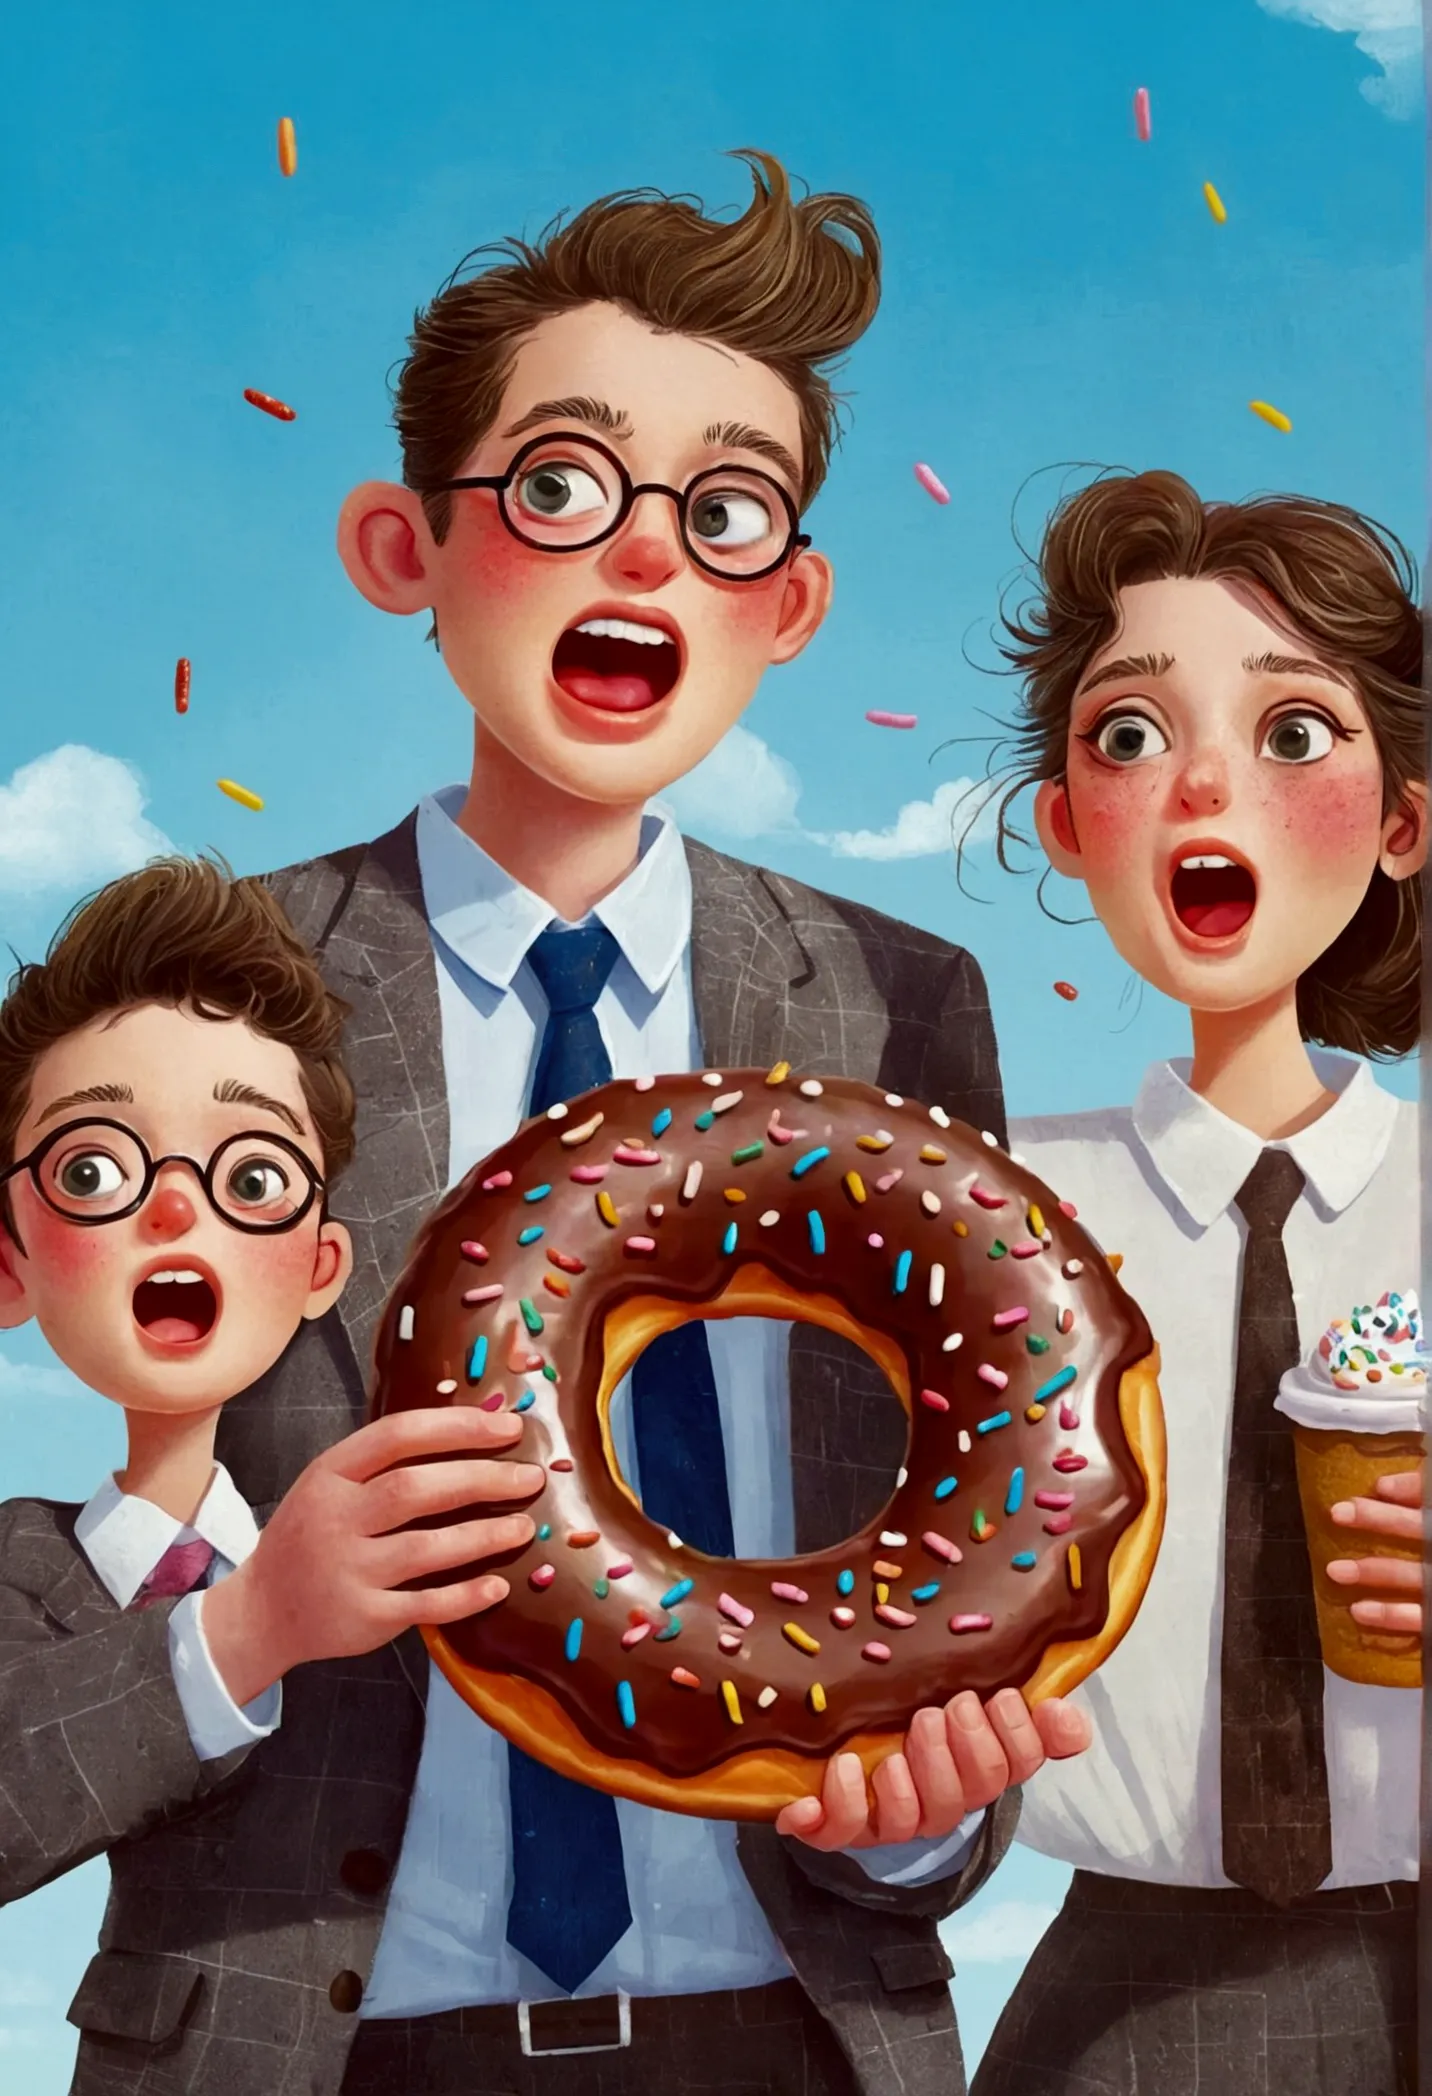 they are running and holding a donut with sprinkles, eating a donut, Juster Battle, funny illustration, the mighty donut, illust...